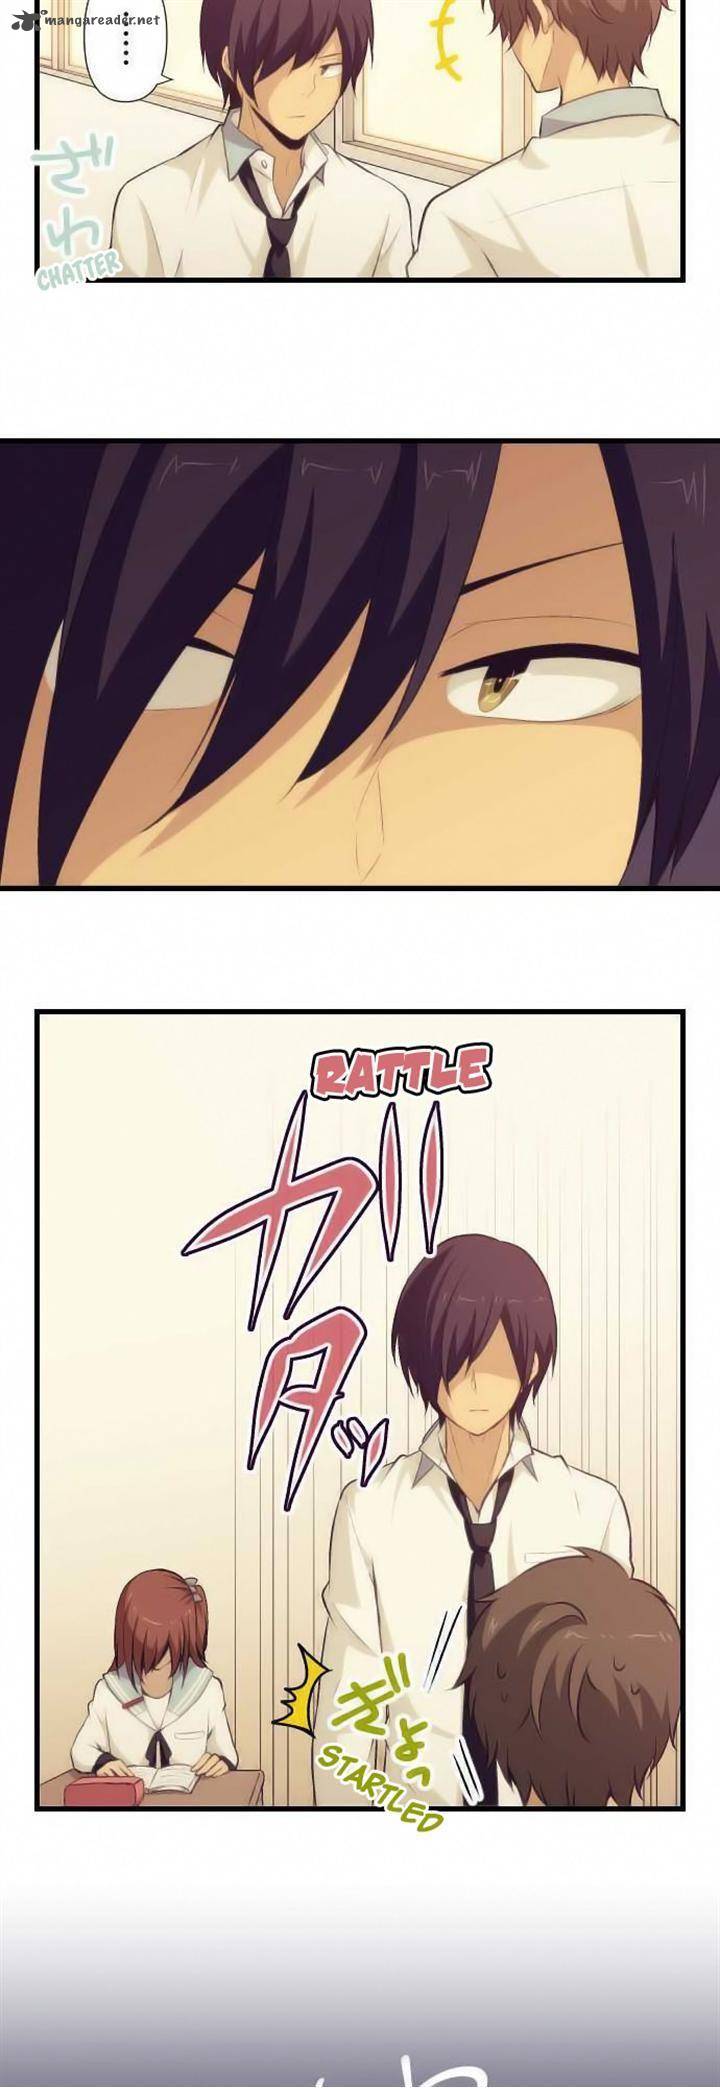 Relife 67 5